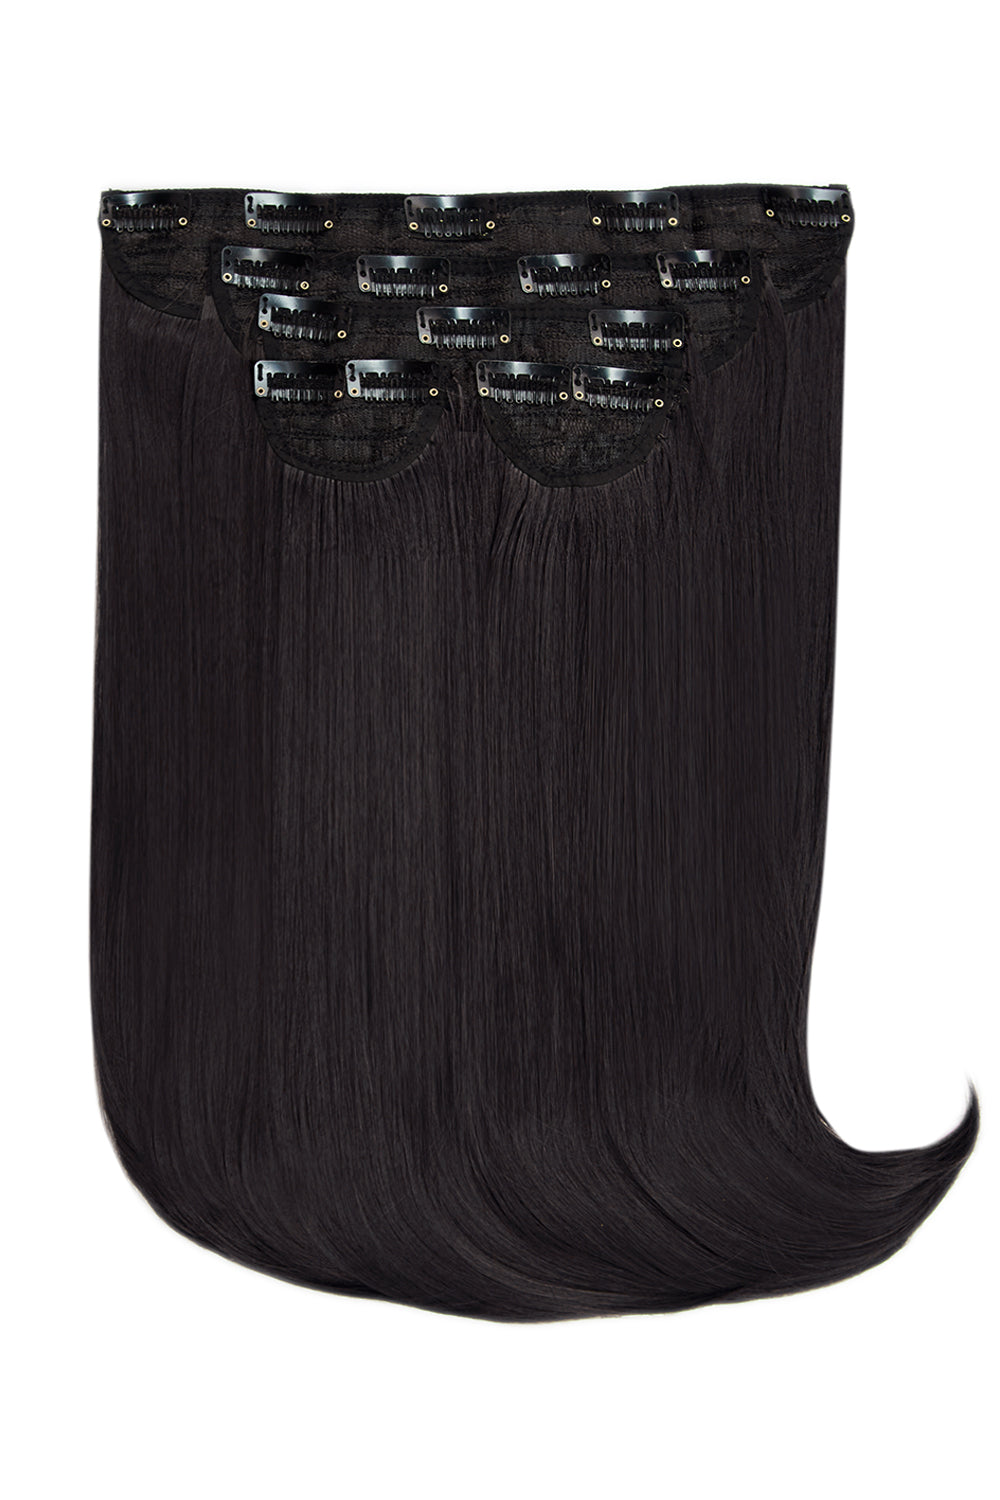 Super Thick 16" 5 Piece Curve Clip In Hair Extensions - Raven